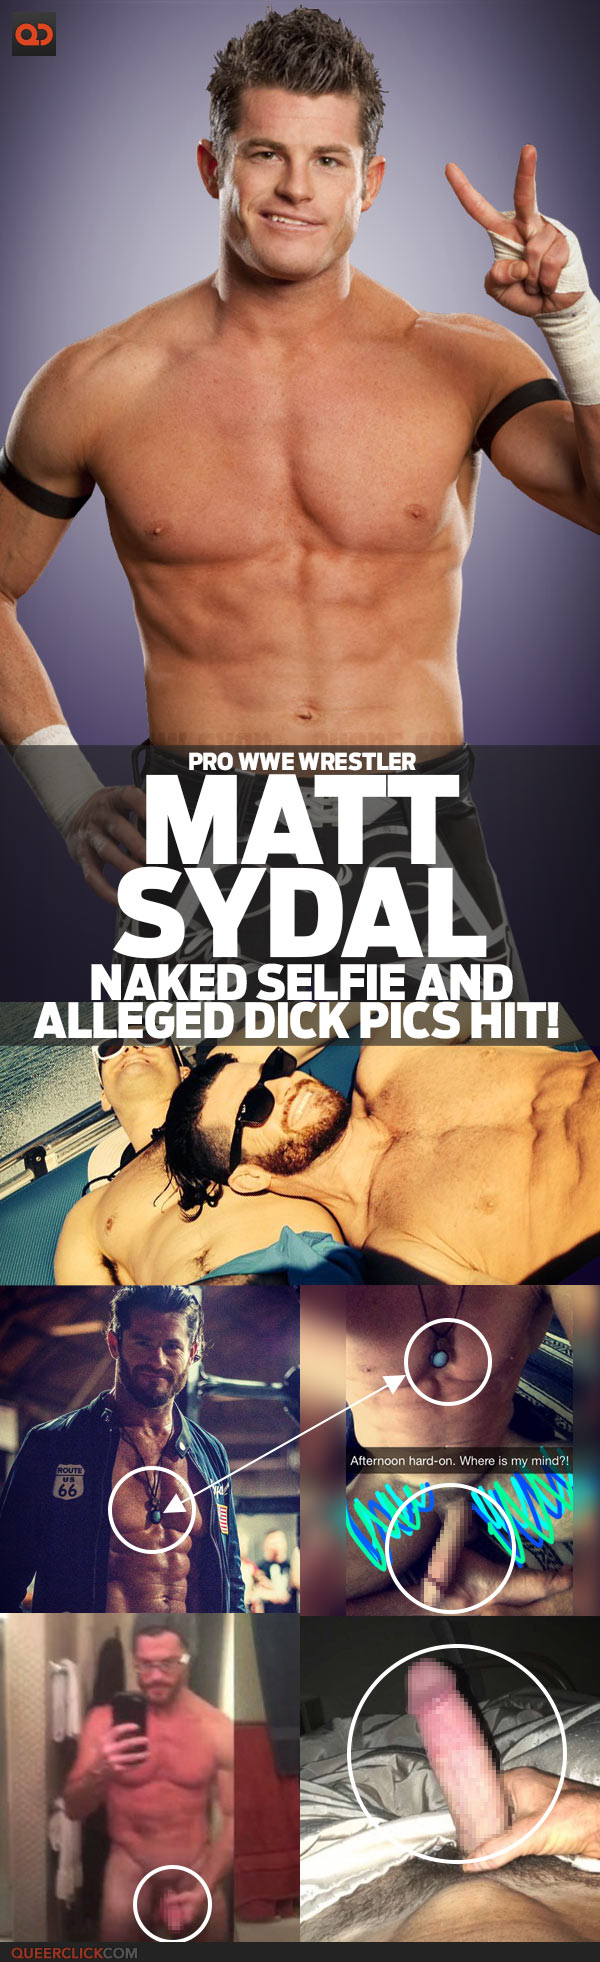 Wrestling Naked Xxx - Matt Sydal, Pro WWE Wrestler, Naked Selfie And Alleged Dick Pics Hit! -  QueerClick